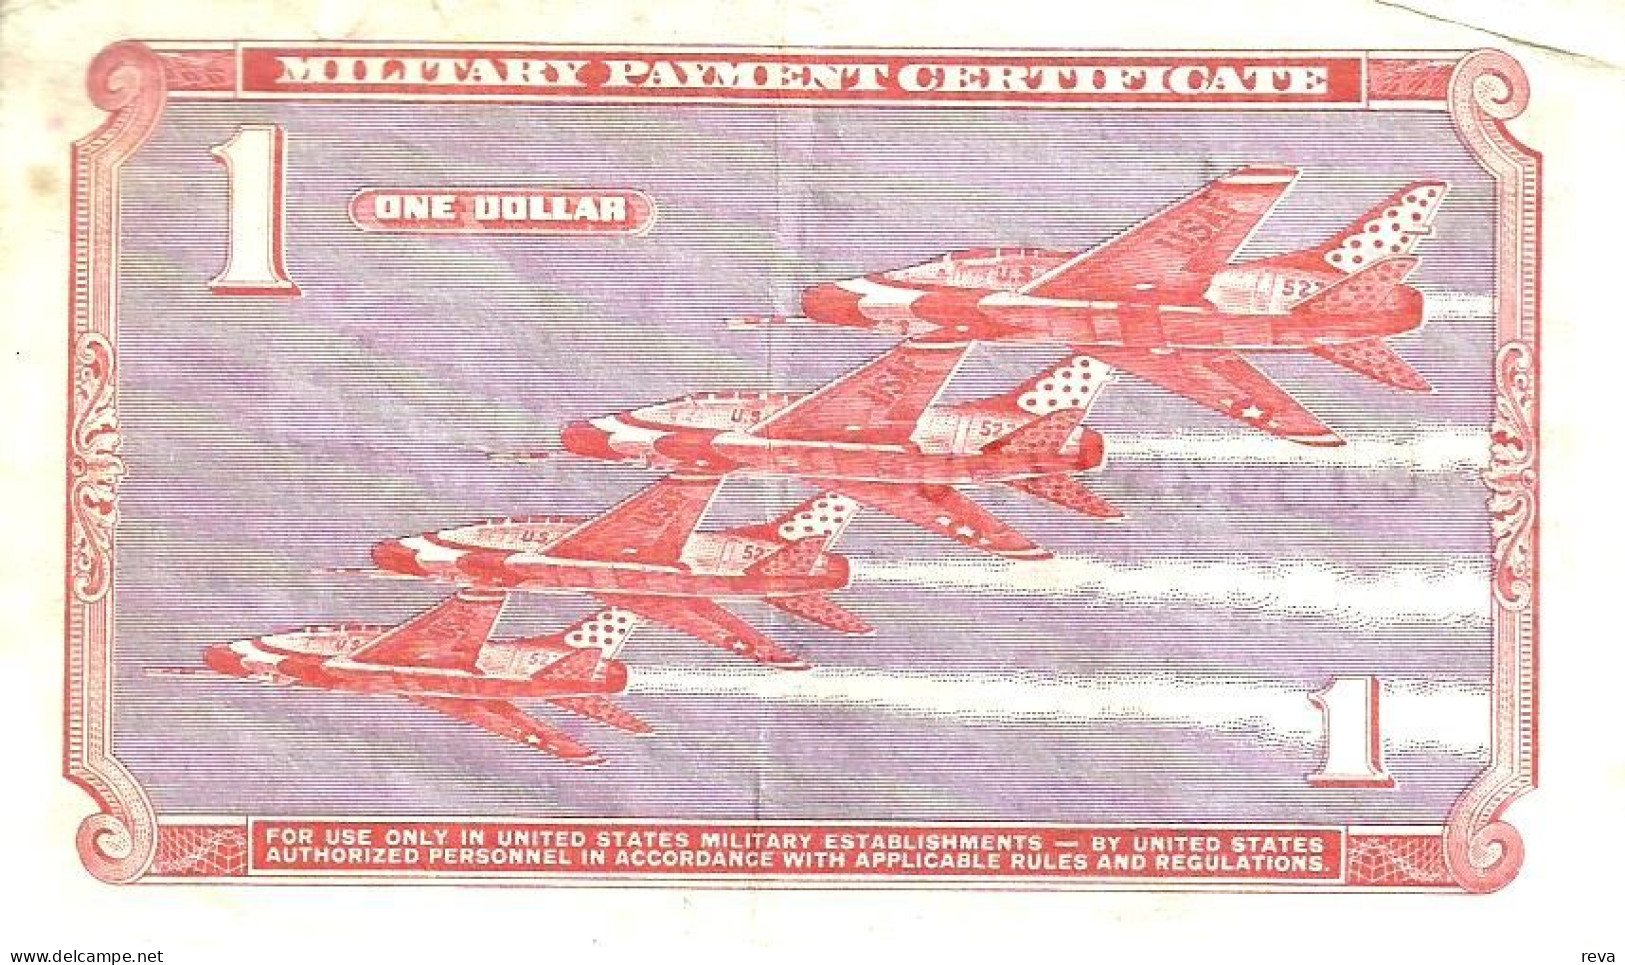 USA UNITED STATES $1 MILITARY CERTIFICATE PURPLE MAN AIRPLANES SERIES 861VF ND(1969) PM79a READ DESCRIPTION CAREFULLY !! - 1969-1970 - Serie 681